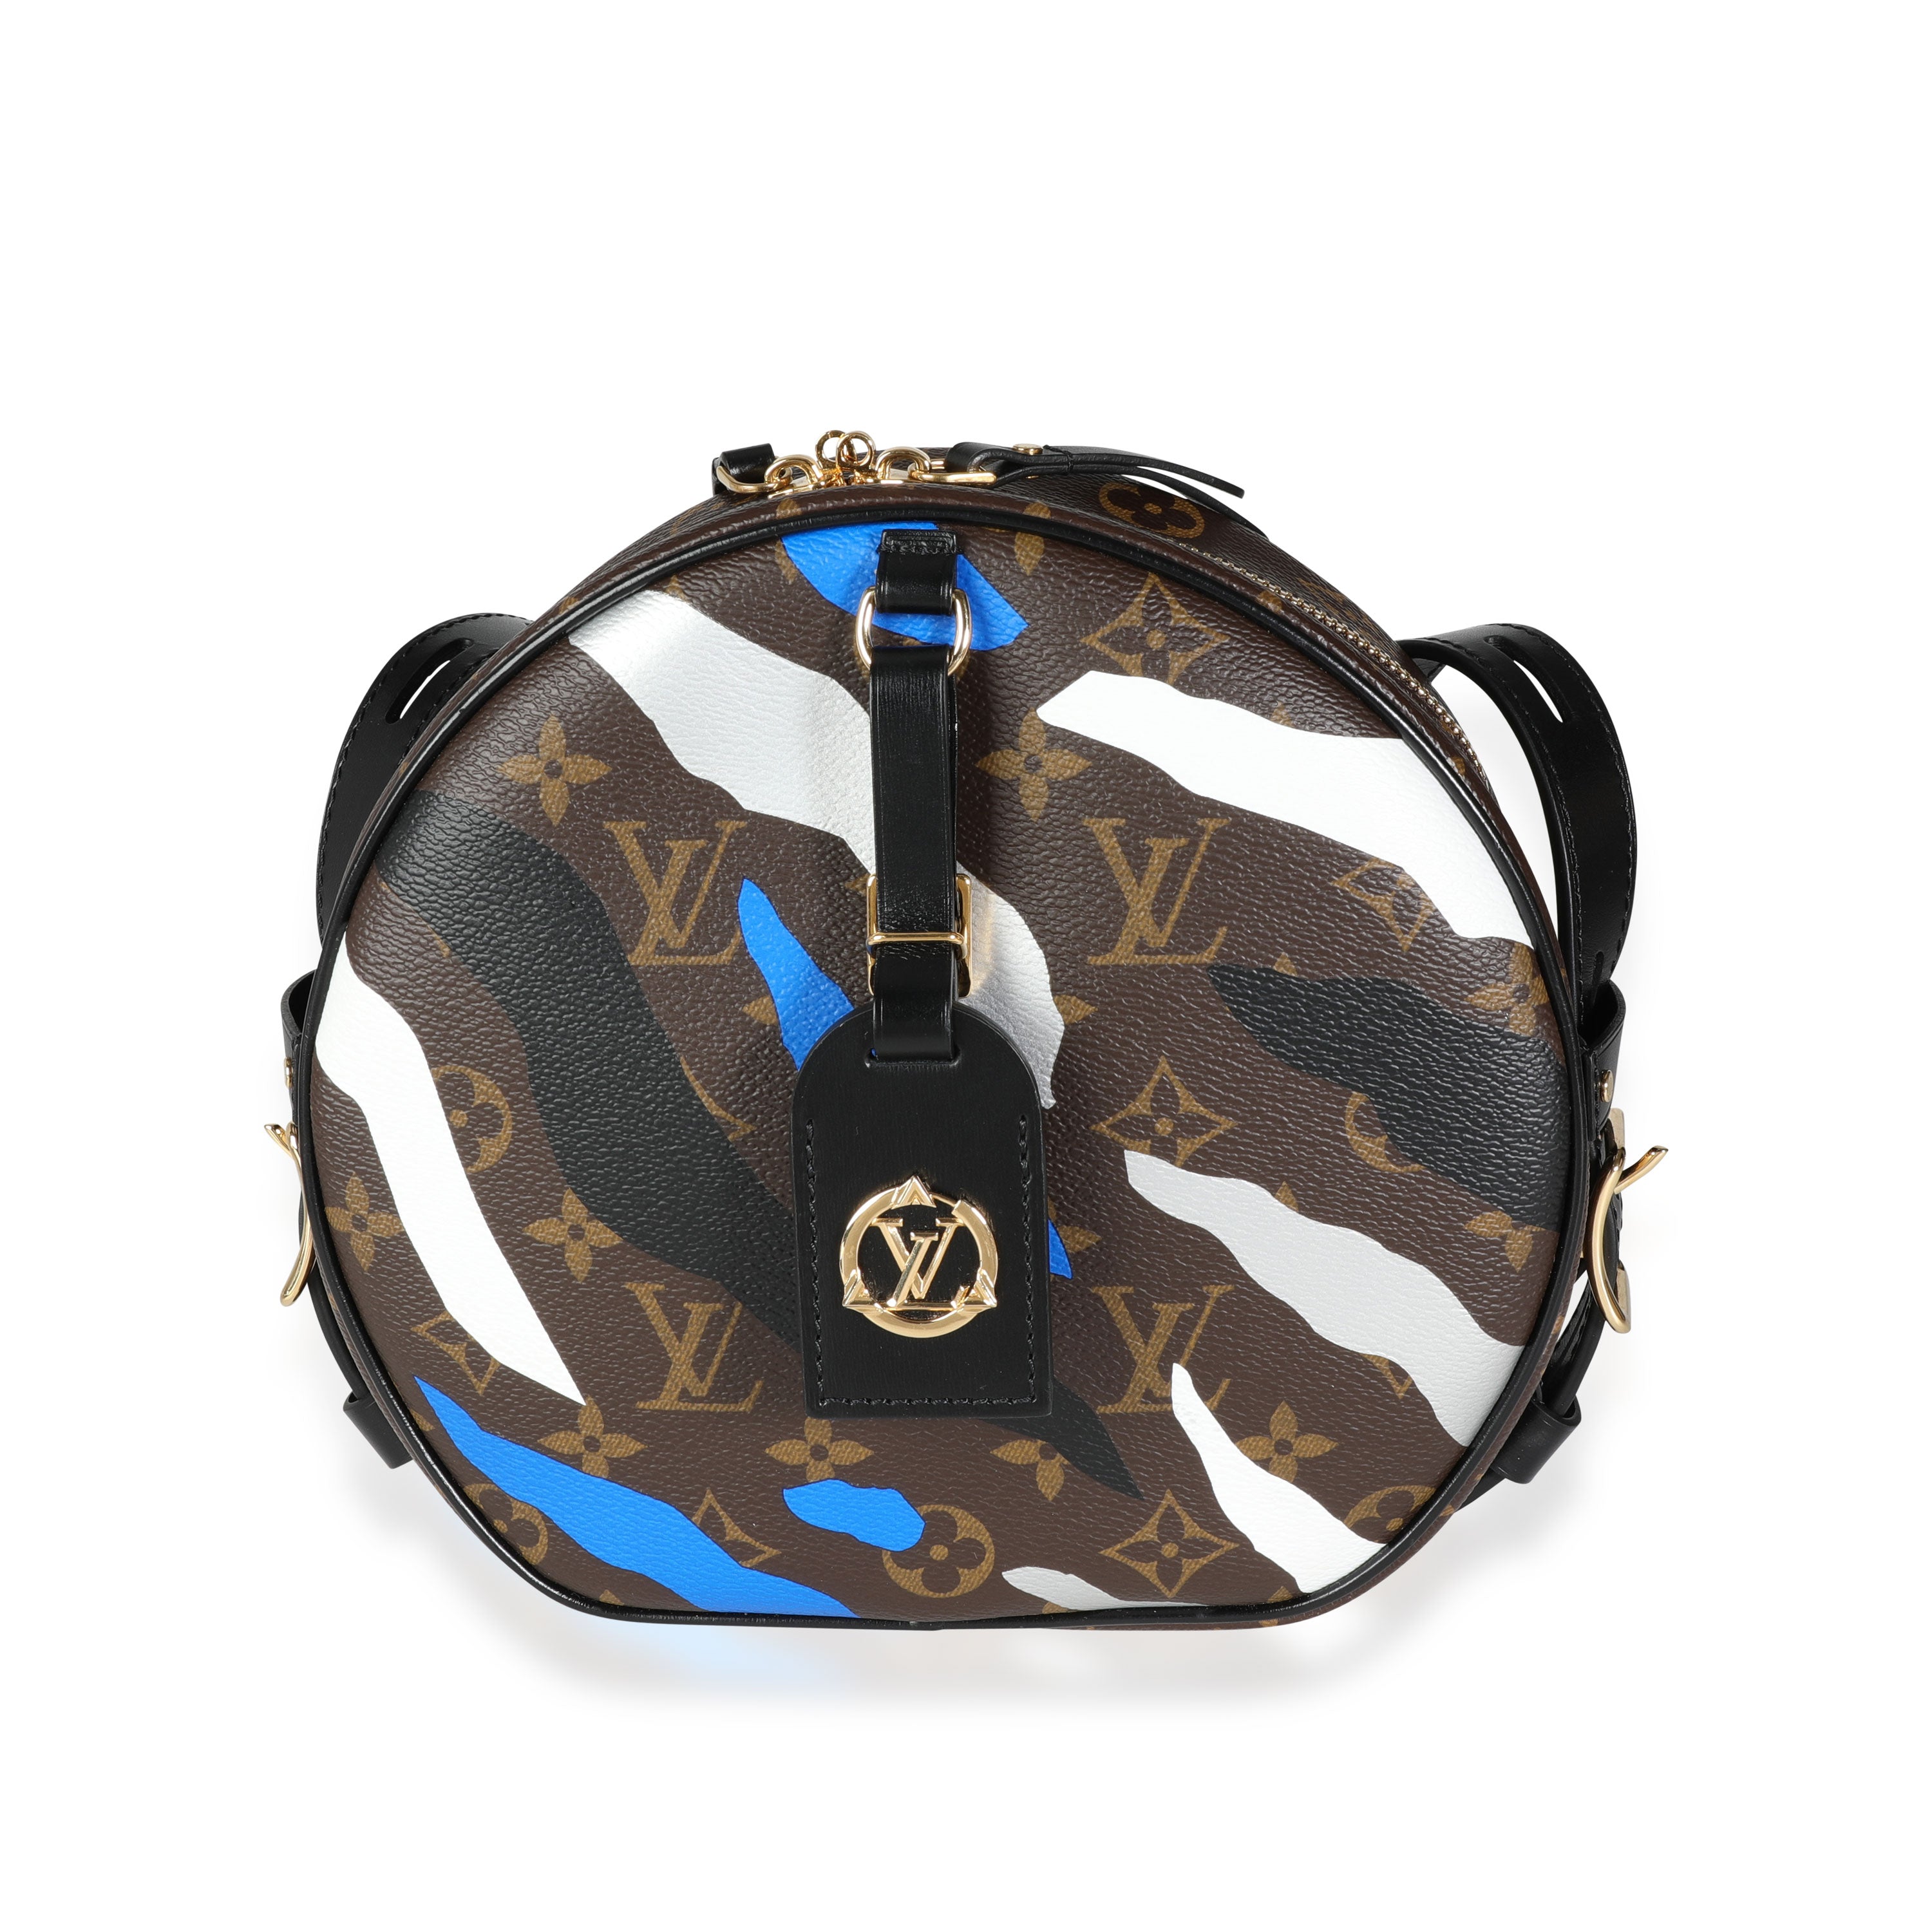 Louis Vuitton x League of Legends: What if you dressed as your